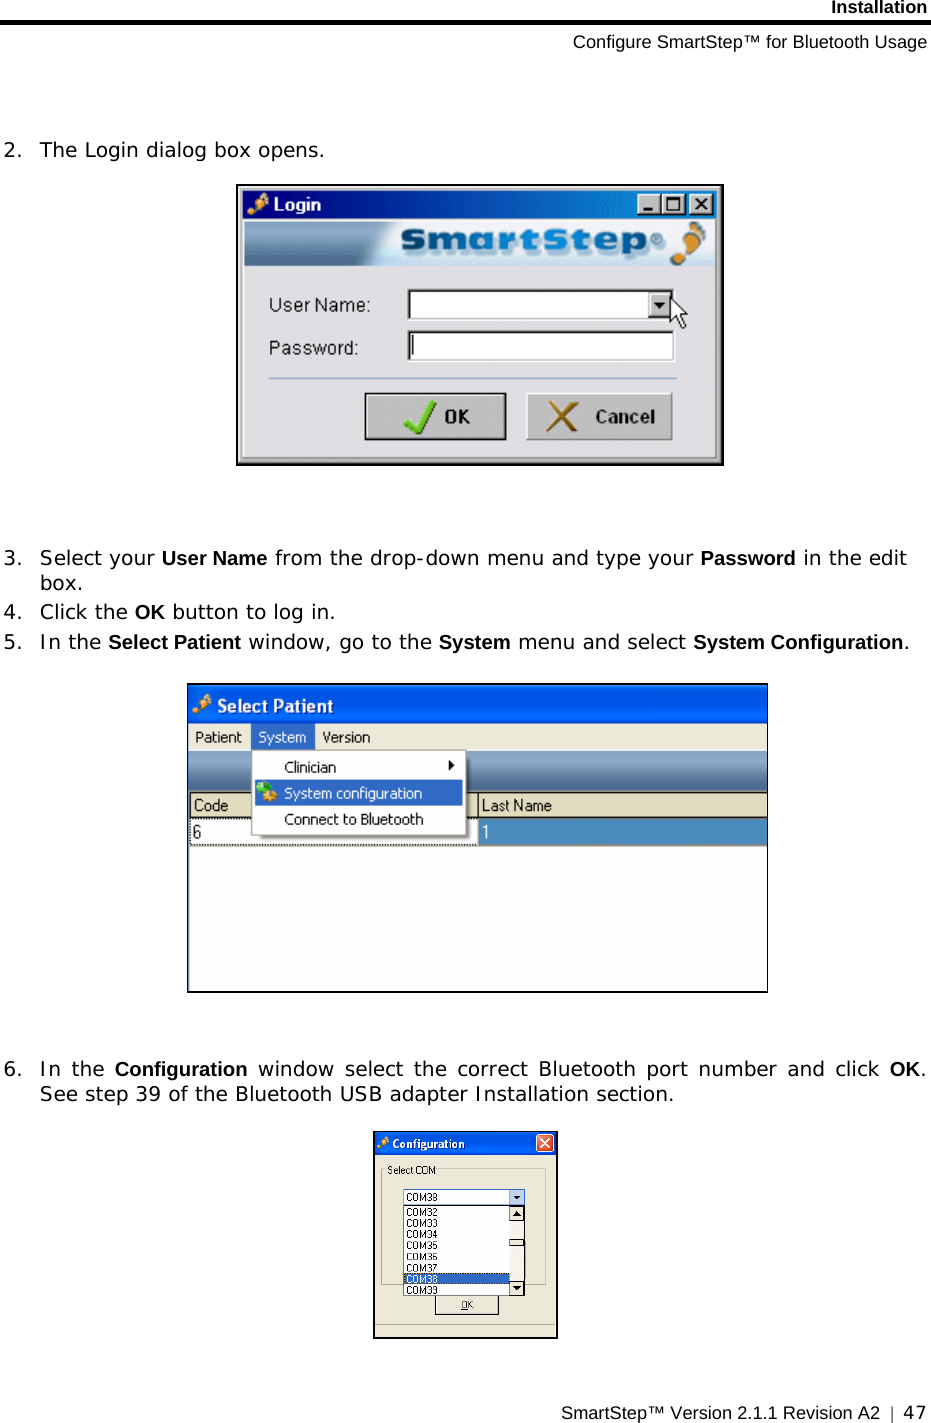 Installation Configure SmartStep™ for Bluetooth Usage SmartStep™ Version 2.1.1 Revision A2  |  47    2. The Login dialog box opens.     3. Select your User Name from the drop-down menu and type your Password in the edit box.  4. Click the OK button to log in. 5. In the Select Patient window, go to the System menu and select System Configuration.     6. In the Configuration window select the correct Bluetooth port number and click OK. See step 39 of the Bluetooth USB adapter Installation section.    